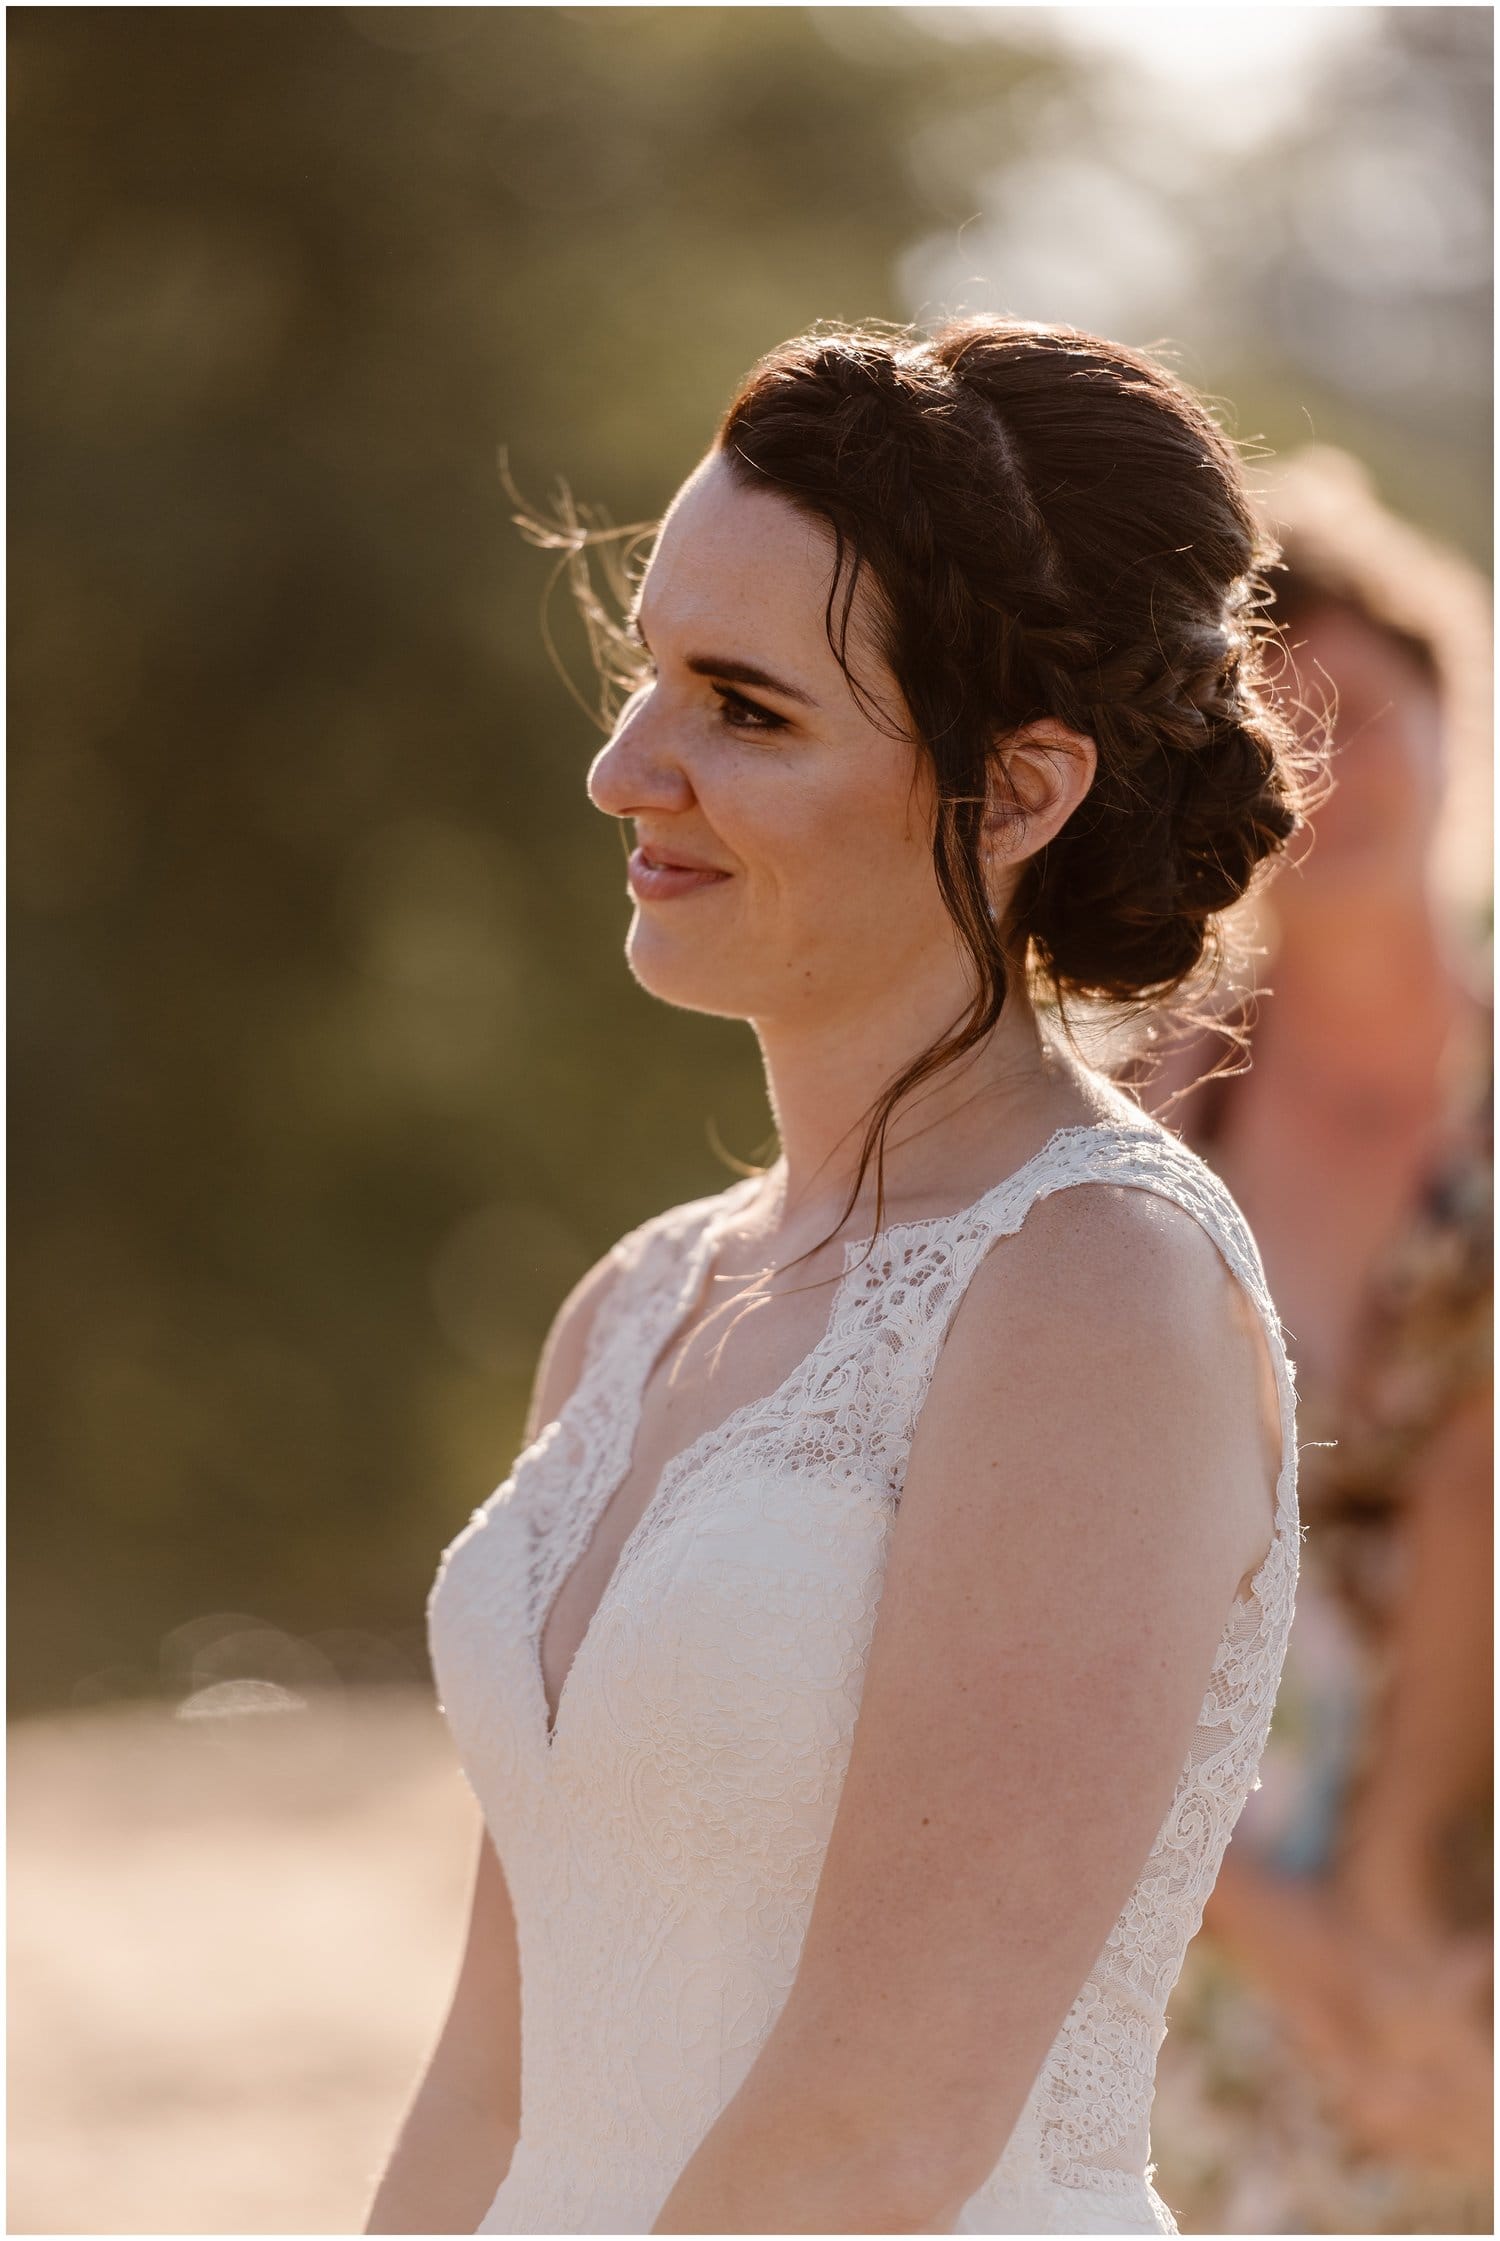 Bride is smiling with her hair in an updo and is wearing a white, lace wedding dress. 